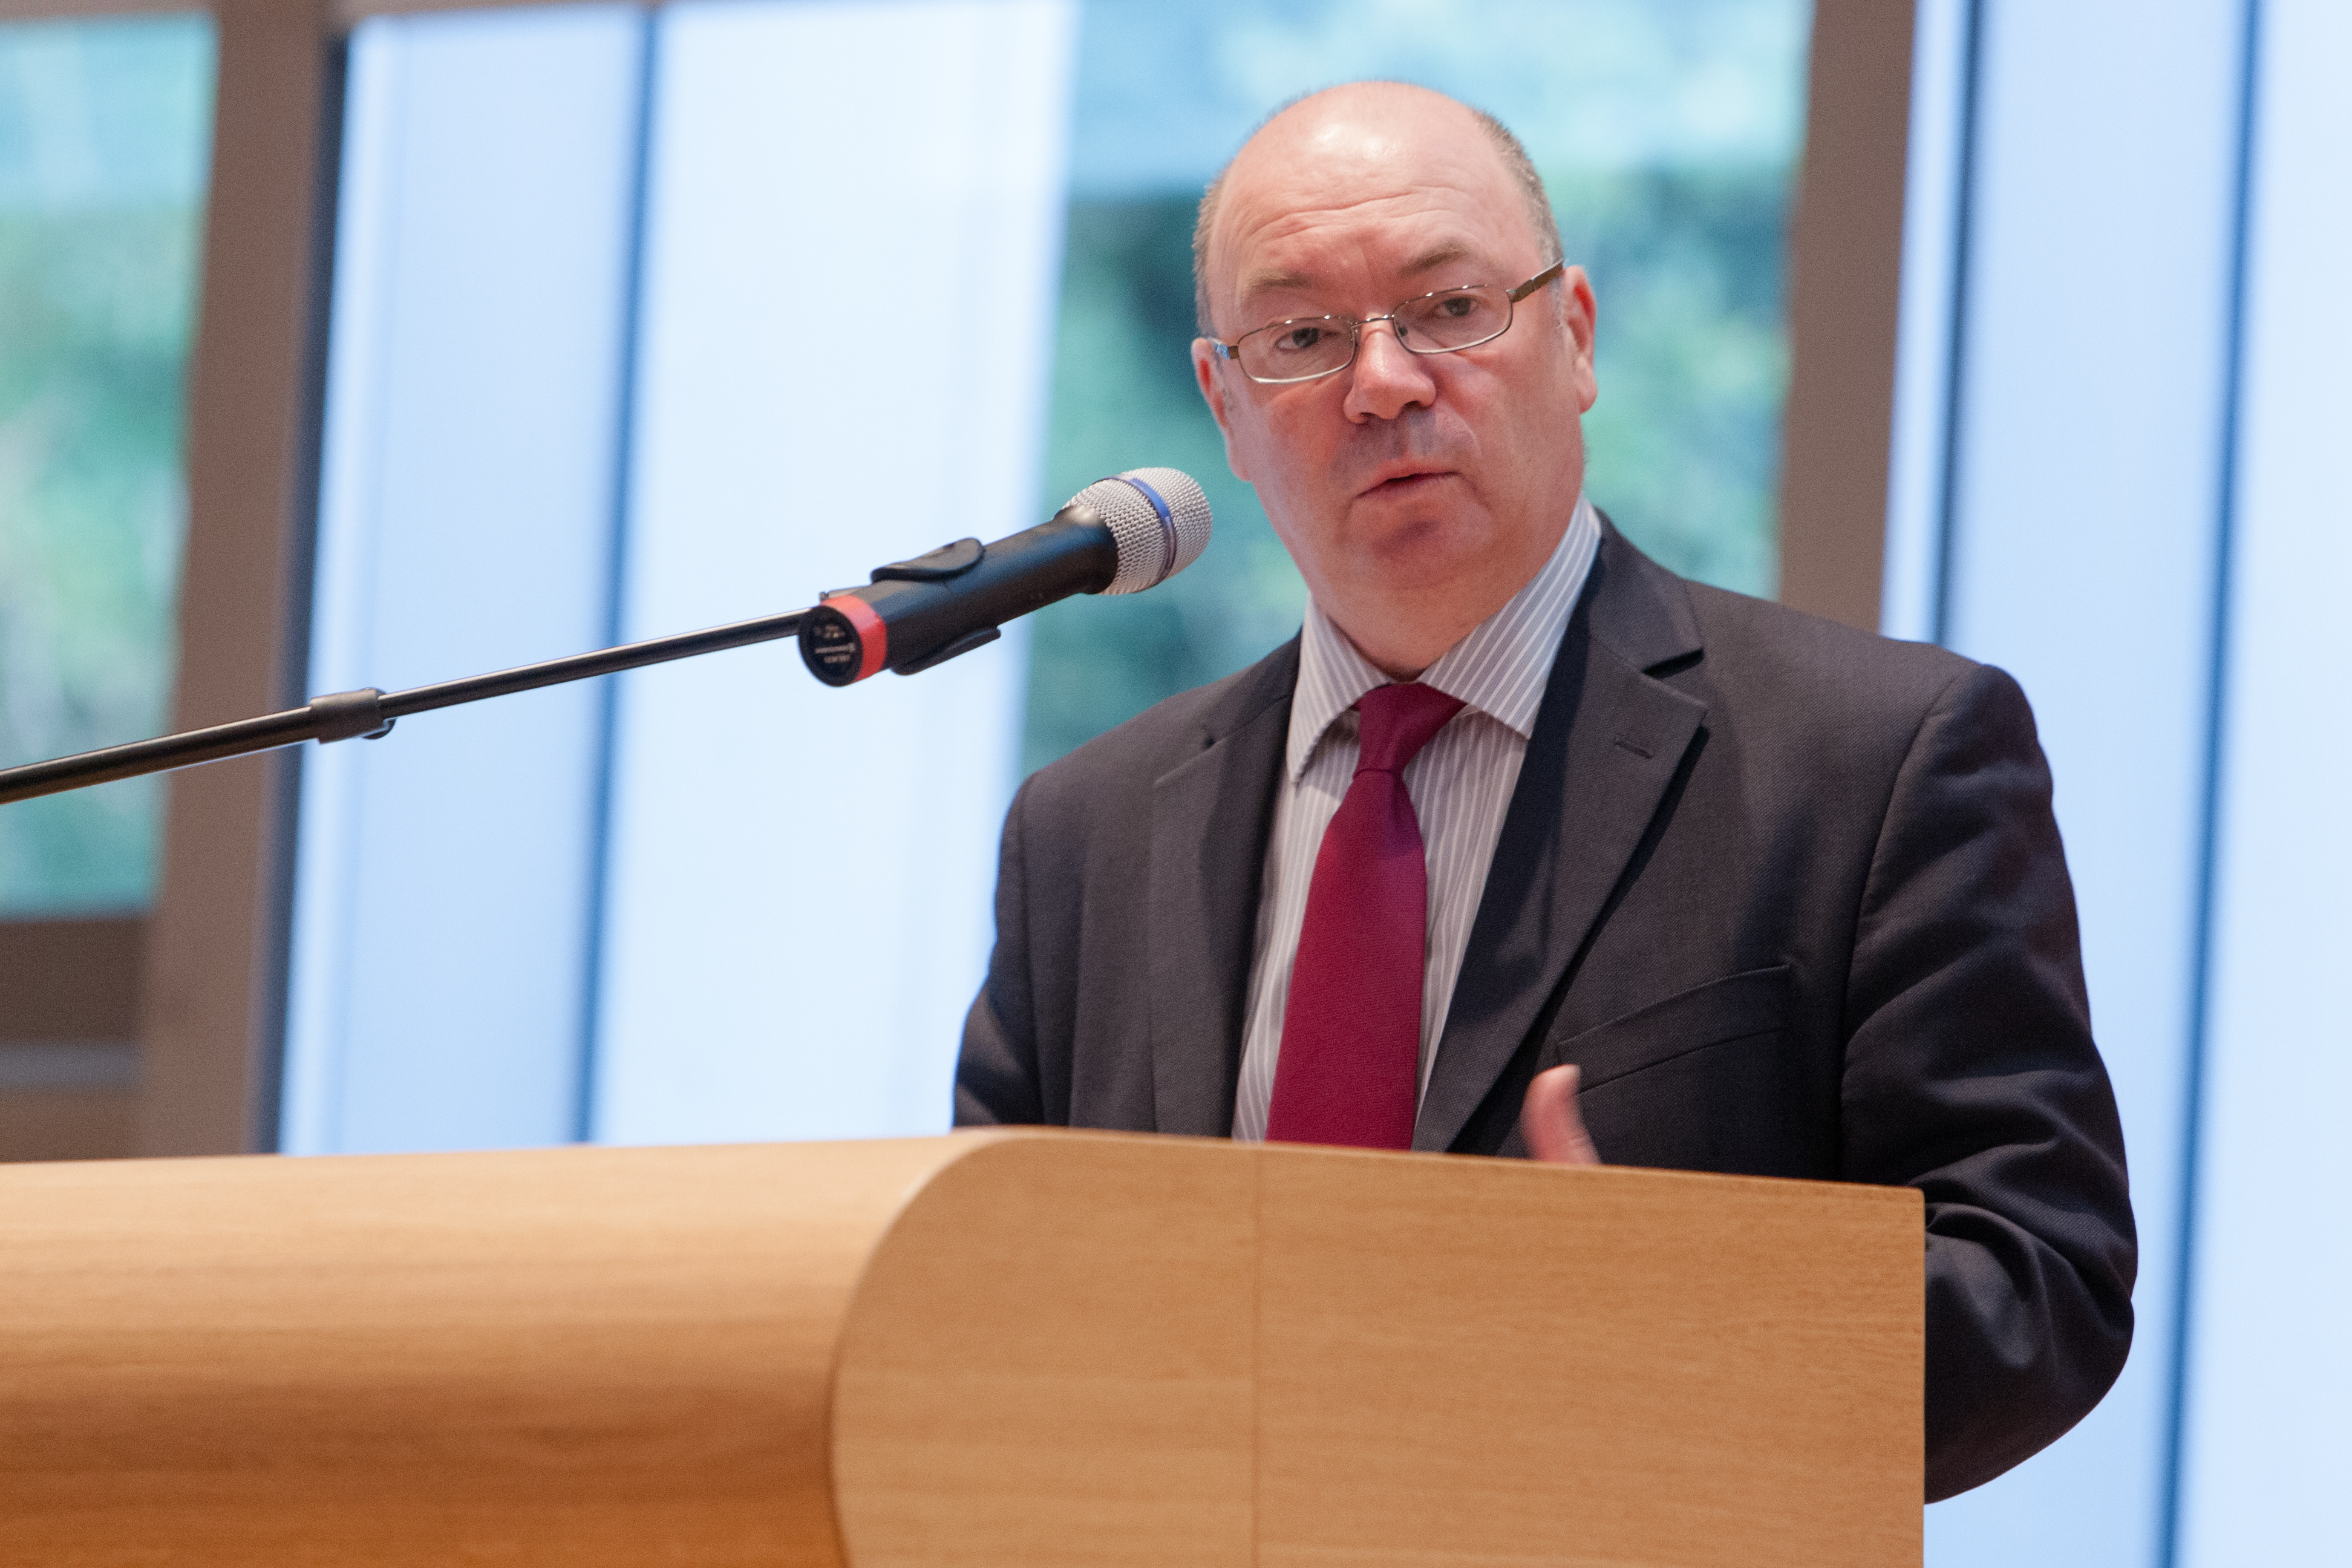 Alistair Burt has called for an investigation into Israeli actions in Gaza.